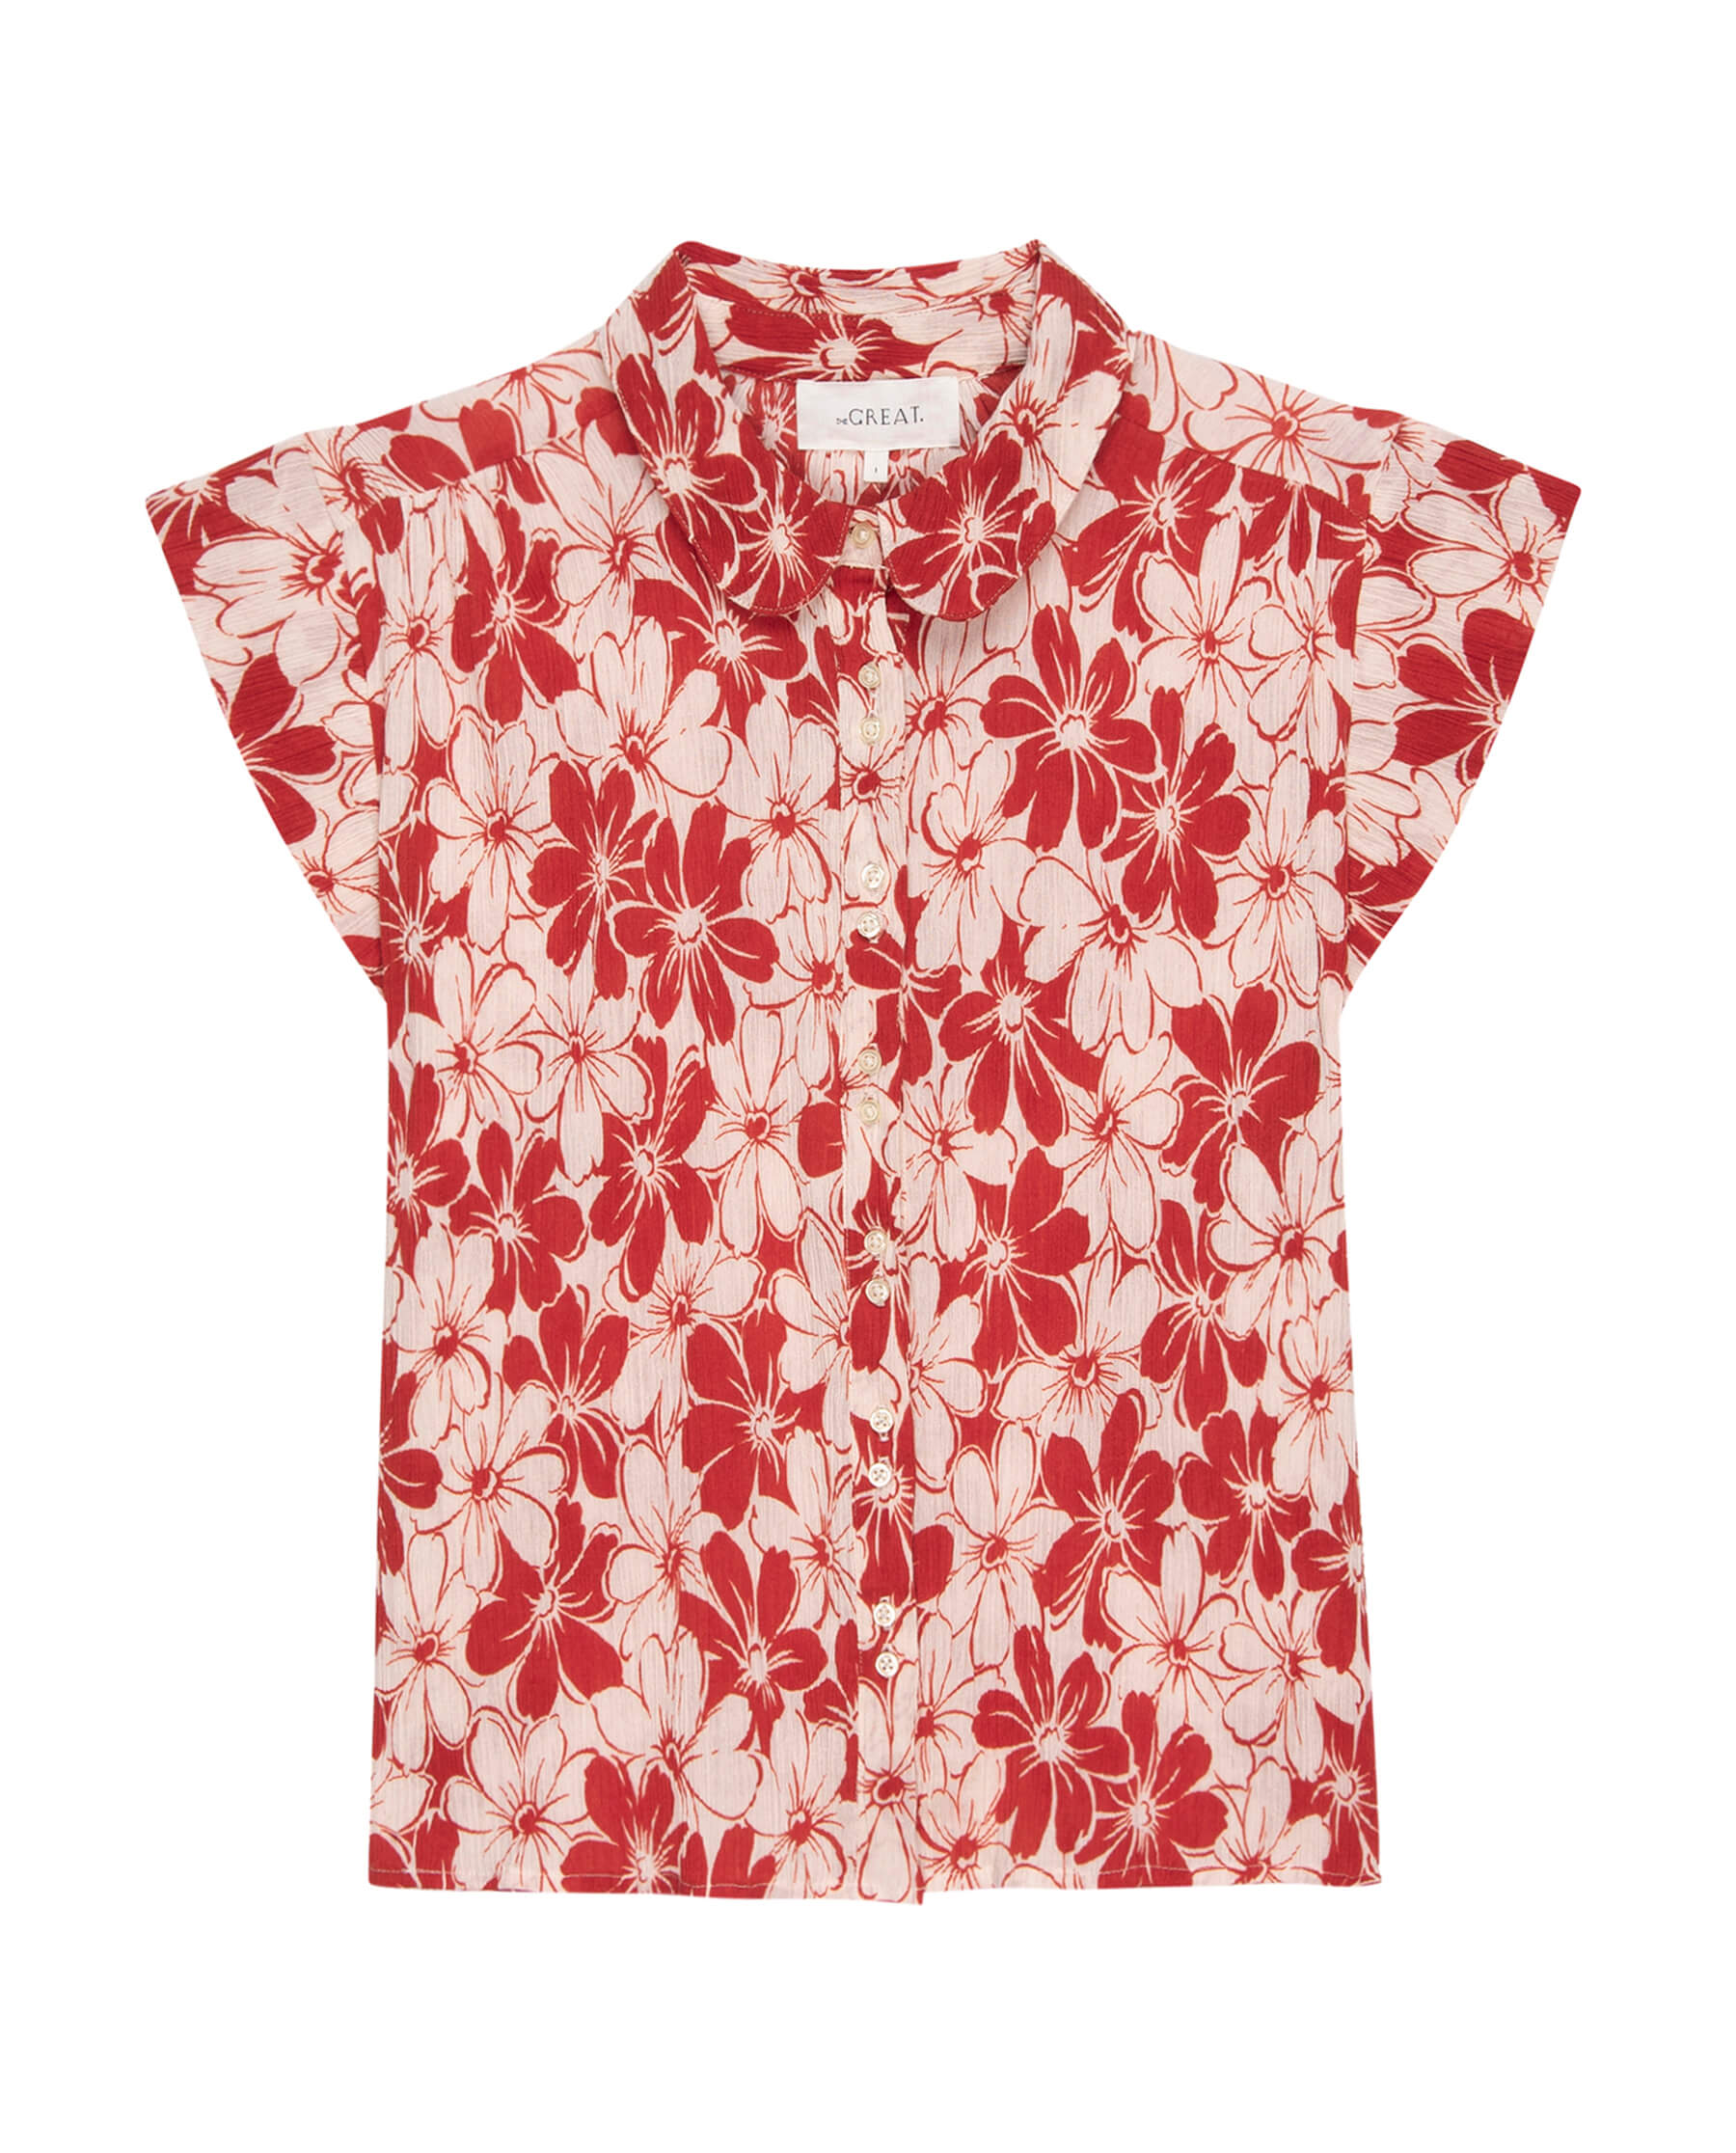 The Wren Top. -- Burnt Red Hibiscus Flower SHIRTS THE GREAT. SU24